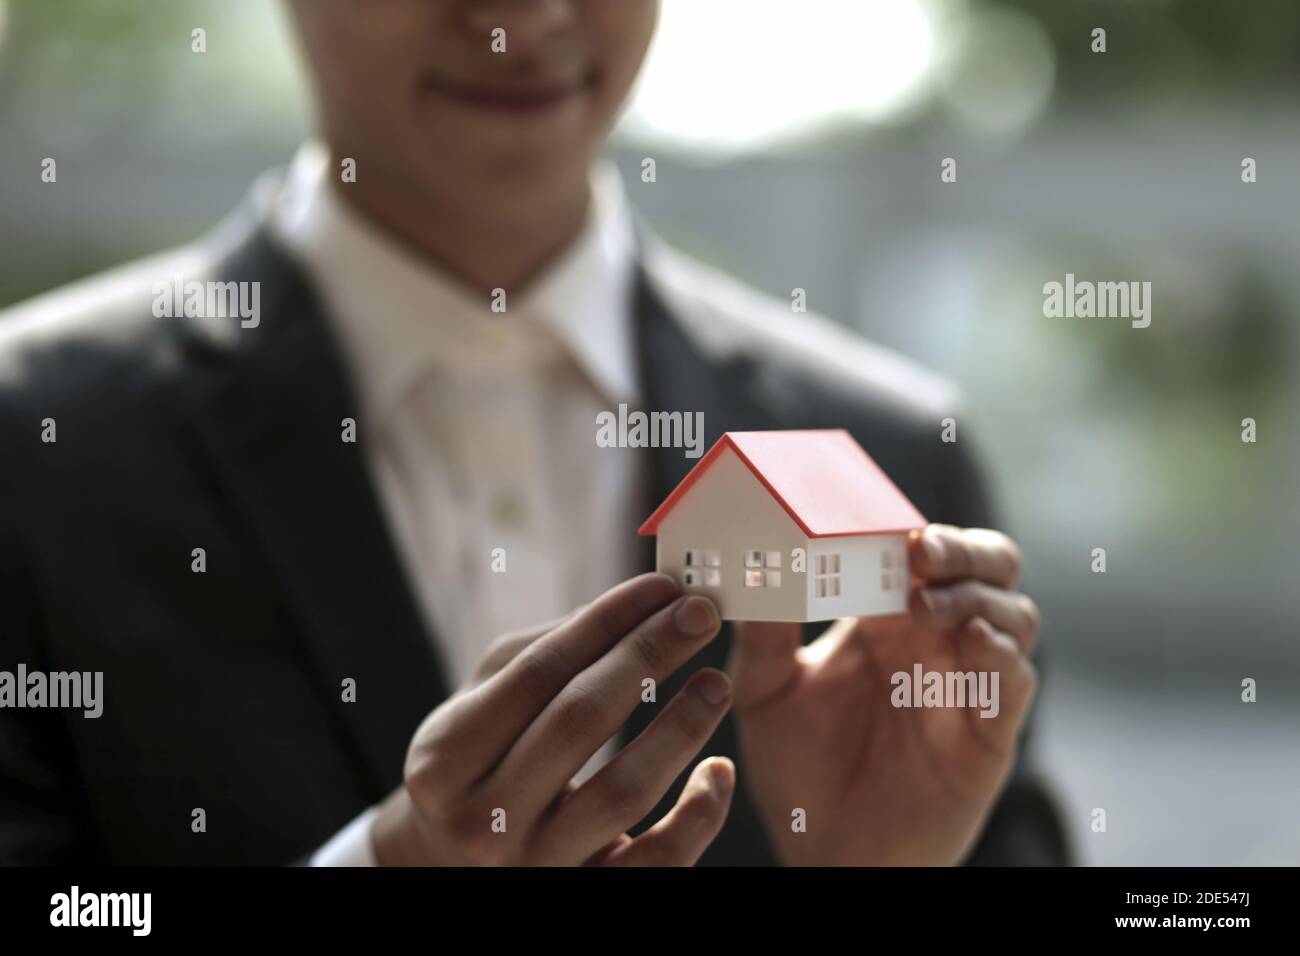 Businessman holding model house. Architecture, building, construction, real estate and property concept Stock Photo